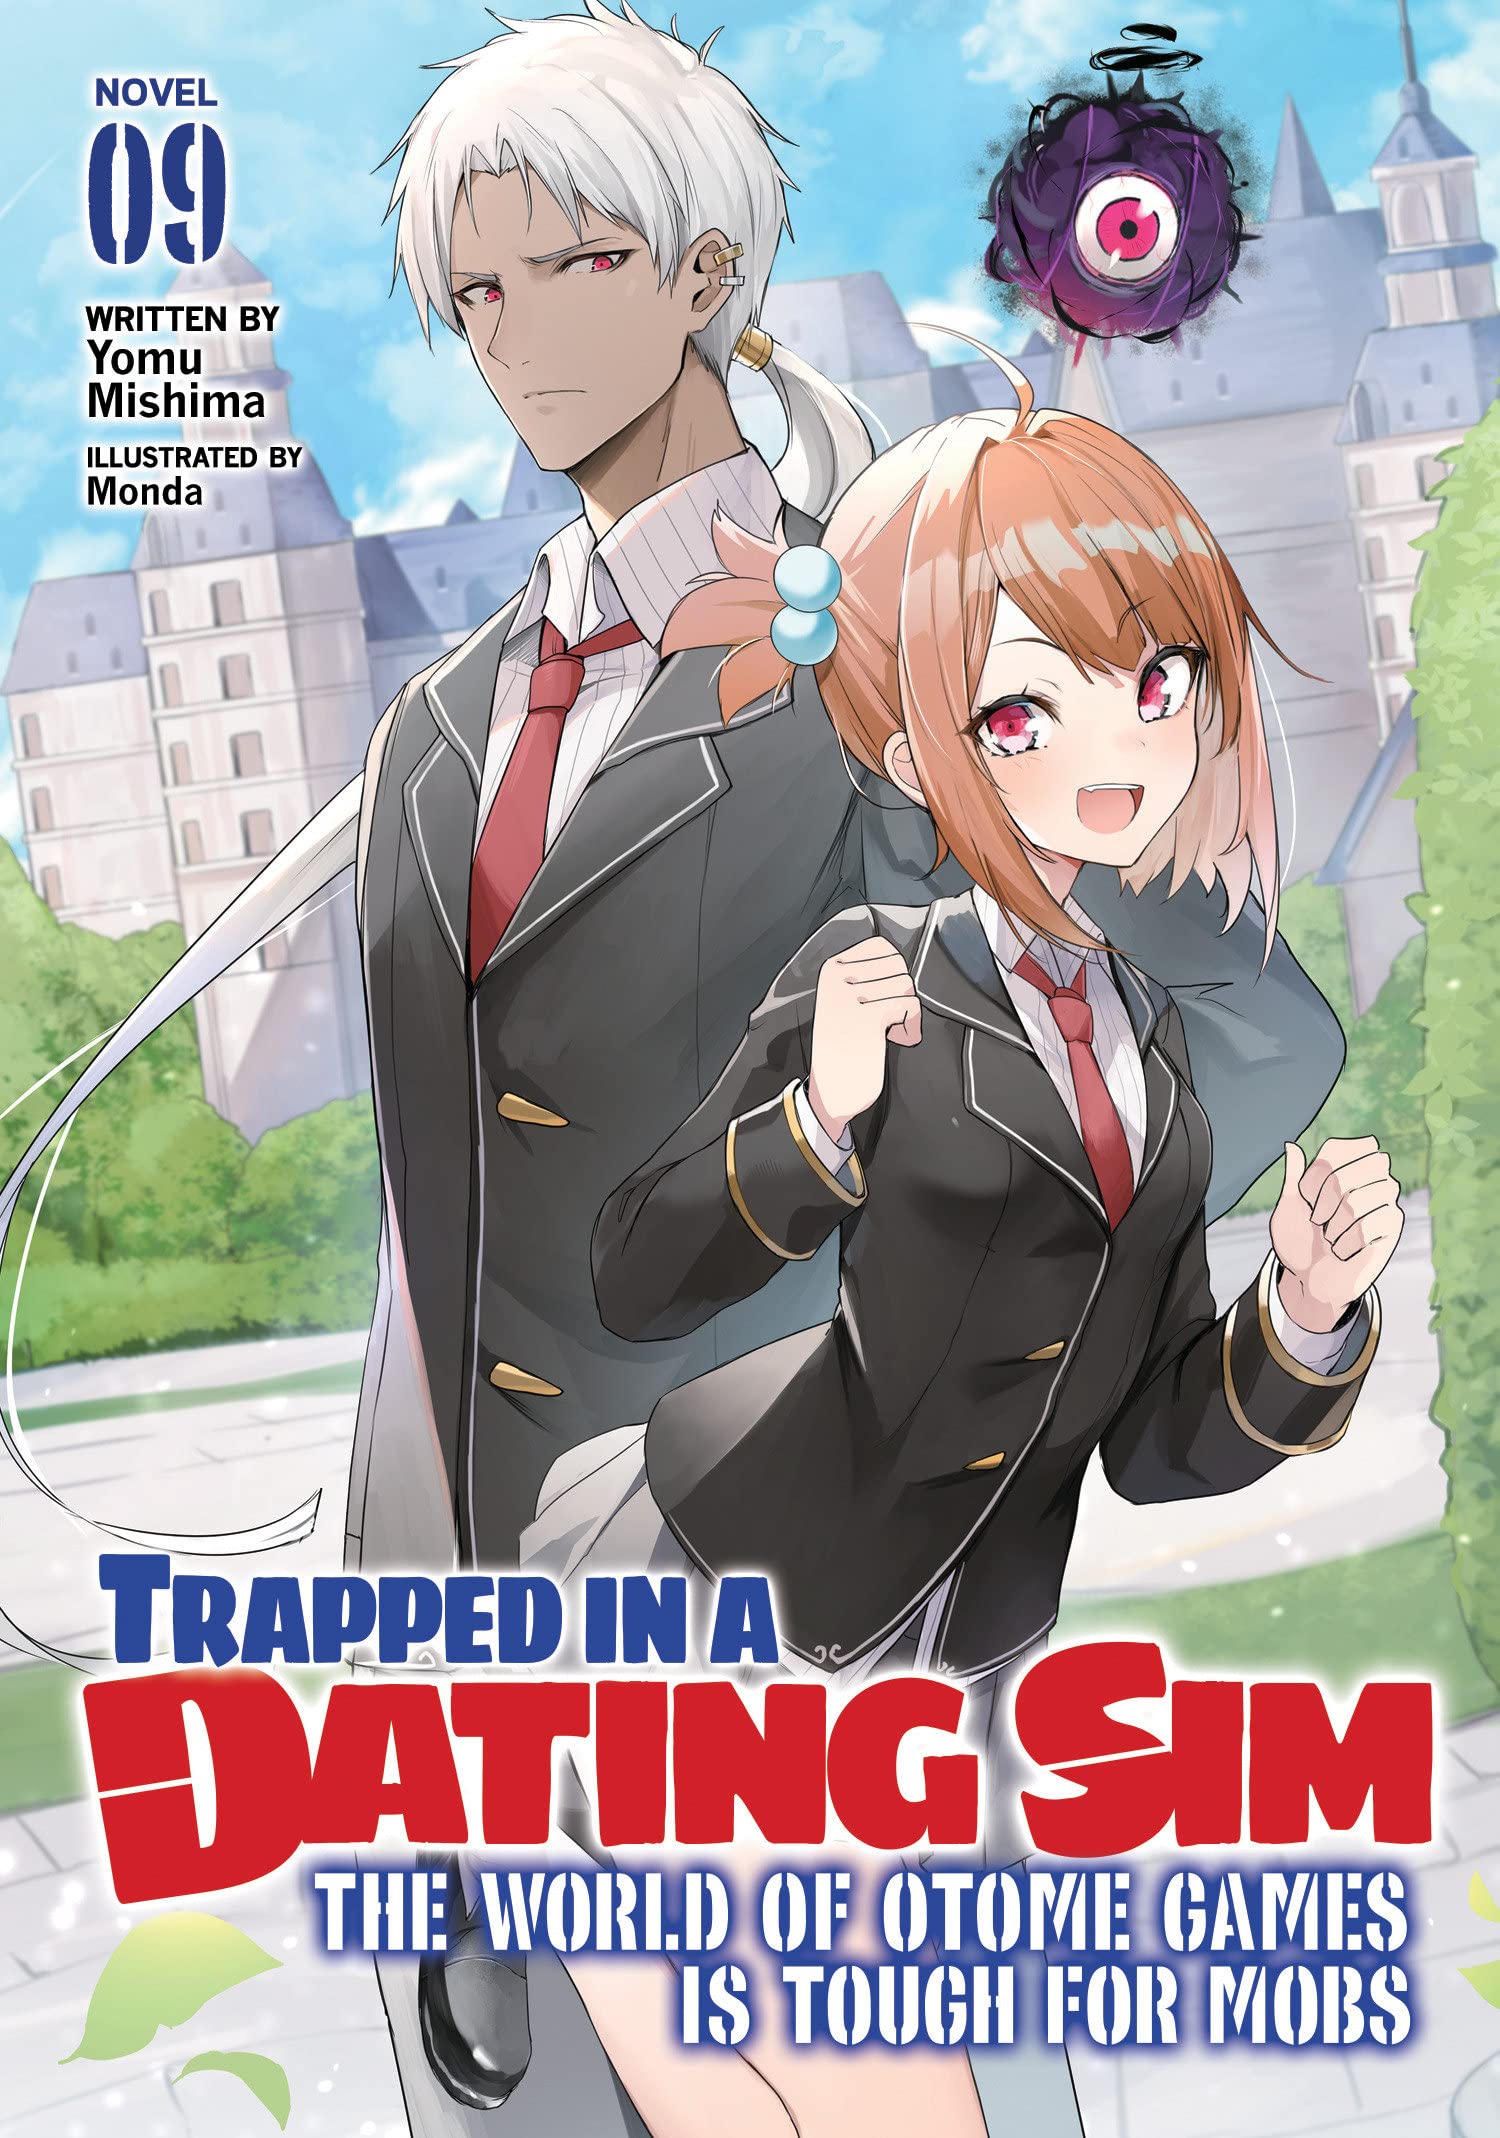 Trapped in a Dating Sim: The World of Otome Games Is Tough for Mobs (Light Novel) Vol. 09